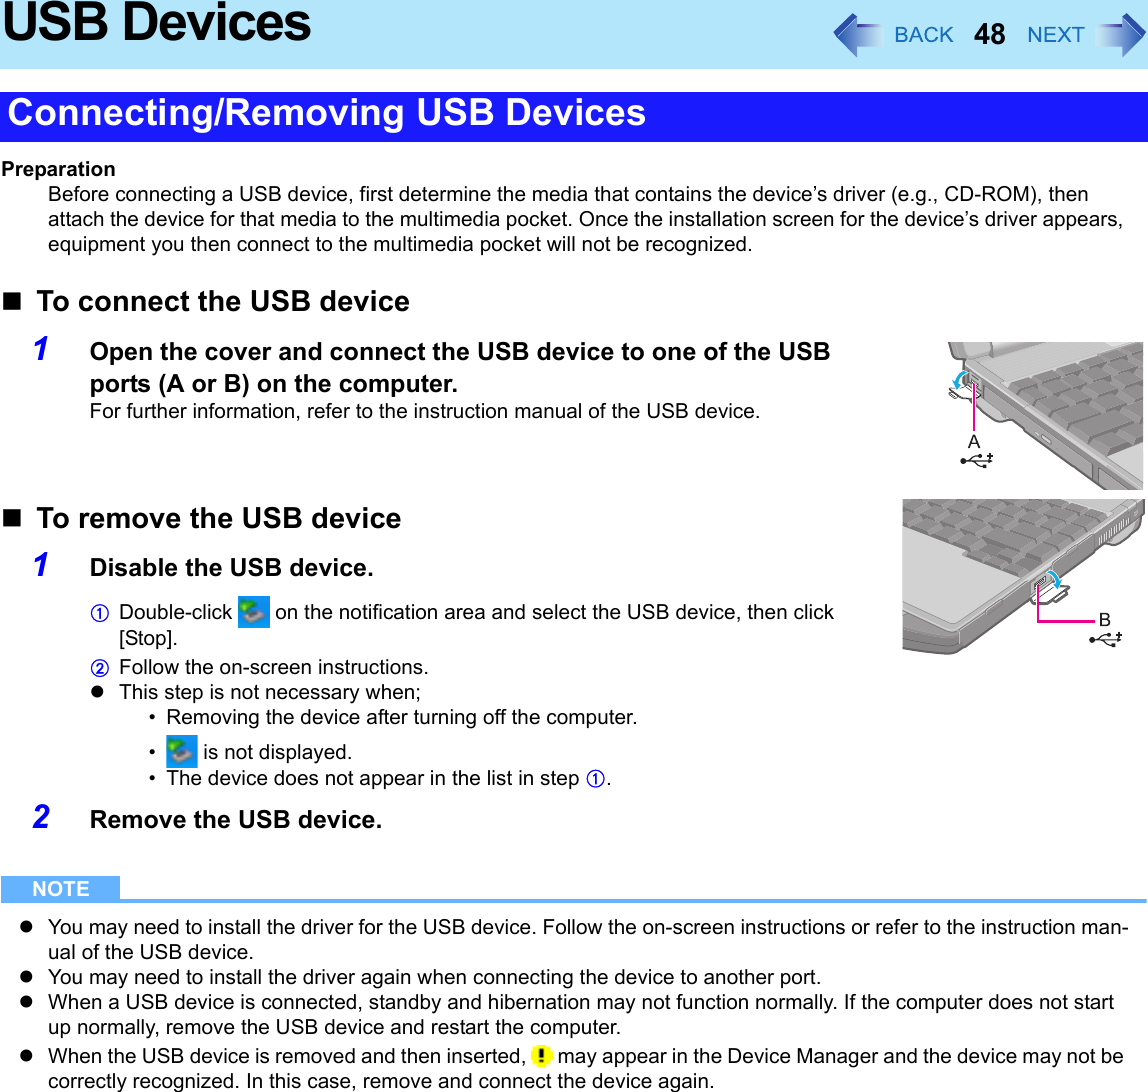 48USB DevicesPreparationBefore connecting a USB device, first determine the media that contains the device’s driver (e.g., CD-ROM), then attach the device for that media to the multimedia pocket. Once the installation screen for the device’s driver appears, equipment you then connect to the multimedia pocket will not be recognized.To connect the USB device1Open the cover and connect the USB device to one of the USB ports (A or B) on the computer.For further information, refer to the instruction manual of the USB device.To remove the USB device1Disable the USB device.ADouble-click   on the notification area and select the USB device, then click [Stop].BFollow the on-screen instructions.zThis step is not necessary when;• Removing the device after turning off the computer.•  is not displayed.• The device does not appear in the list in step A.2Remove the USB device.NOTEzYou may need to install the driver for the USB device. Follow the on-screen instructions or refer to the instruction man-ual of the USB device.zYou may need to install the driver again when connecting the device to another port.zWhen a USB device is connected, standby and hibernation may not function normally. If the computer does not start up normally, remove the USB device and restart the computer.zWhen the USB device is removed and then inserted,   may appear in the Device Manager and the device may not be correctly recognized. In this case, remove and connect the device again.Connecting/Removing USB Devices